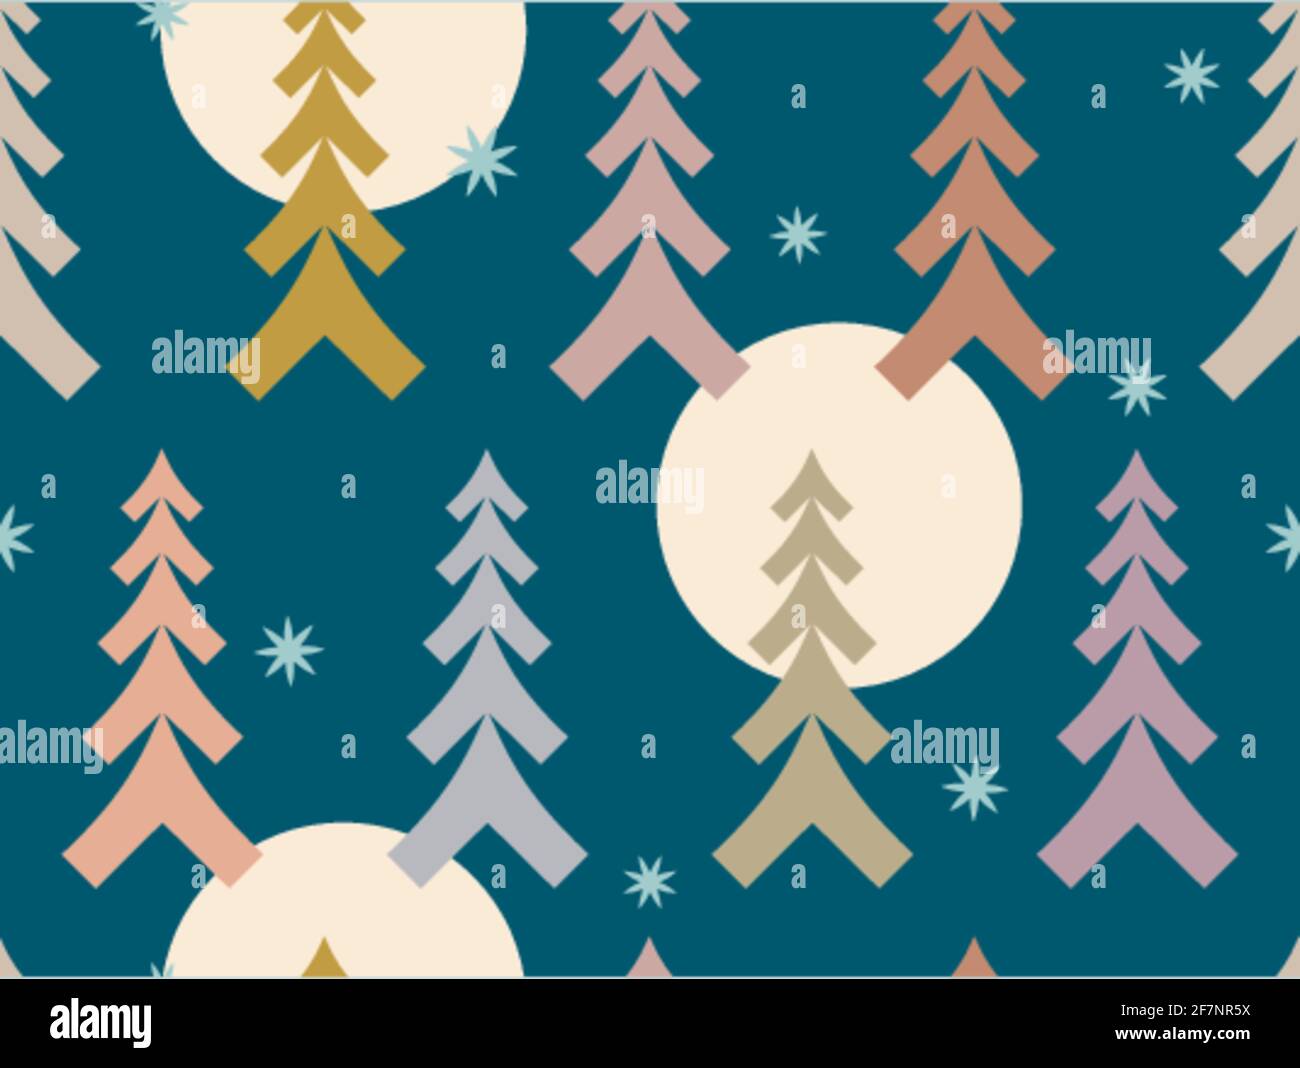 Woodland geometric trees with moons and stars designed from different sizes of V-shapes for printed papers, digital designs, interior decor objects. Stock Vector